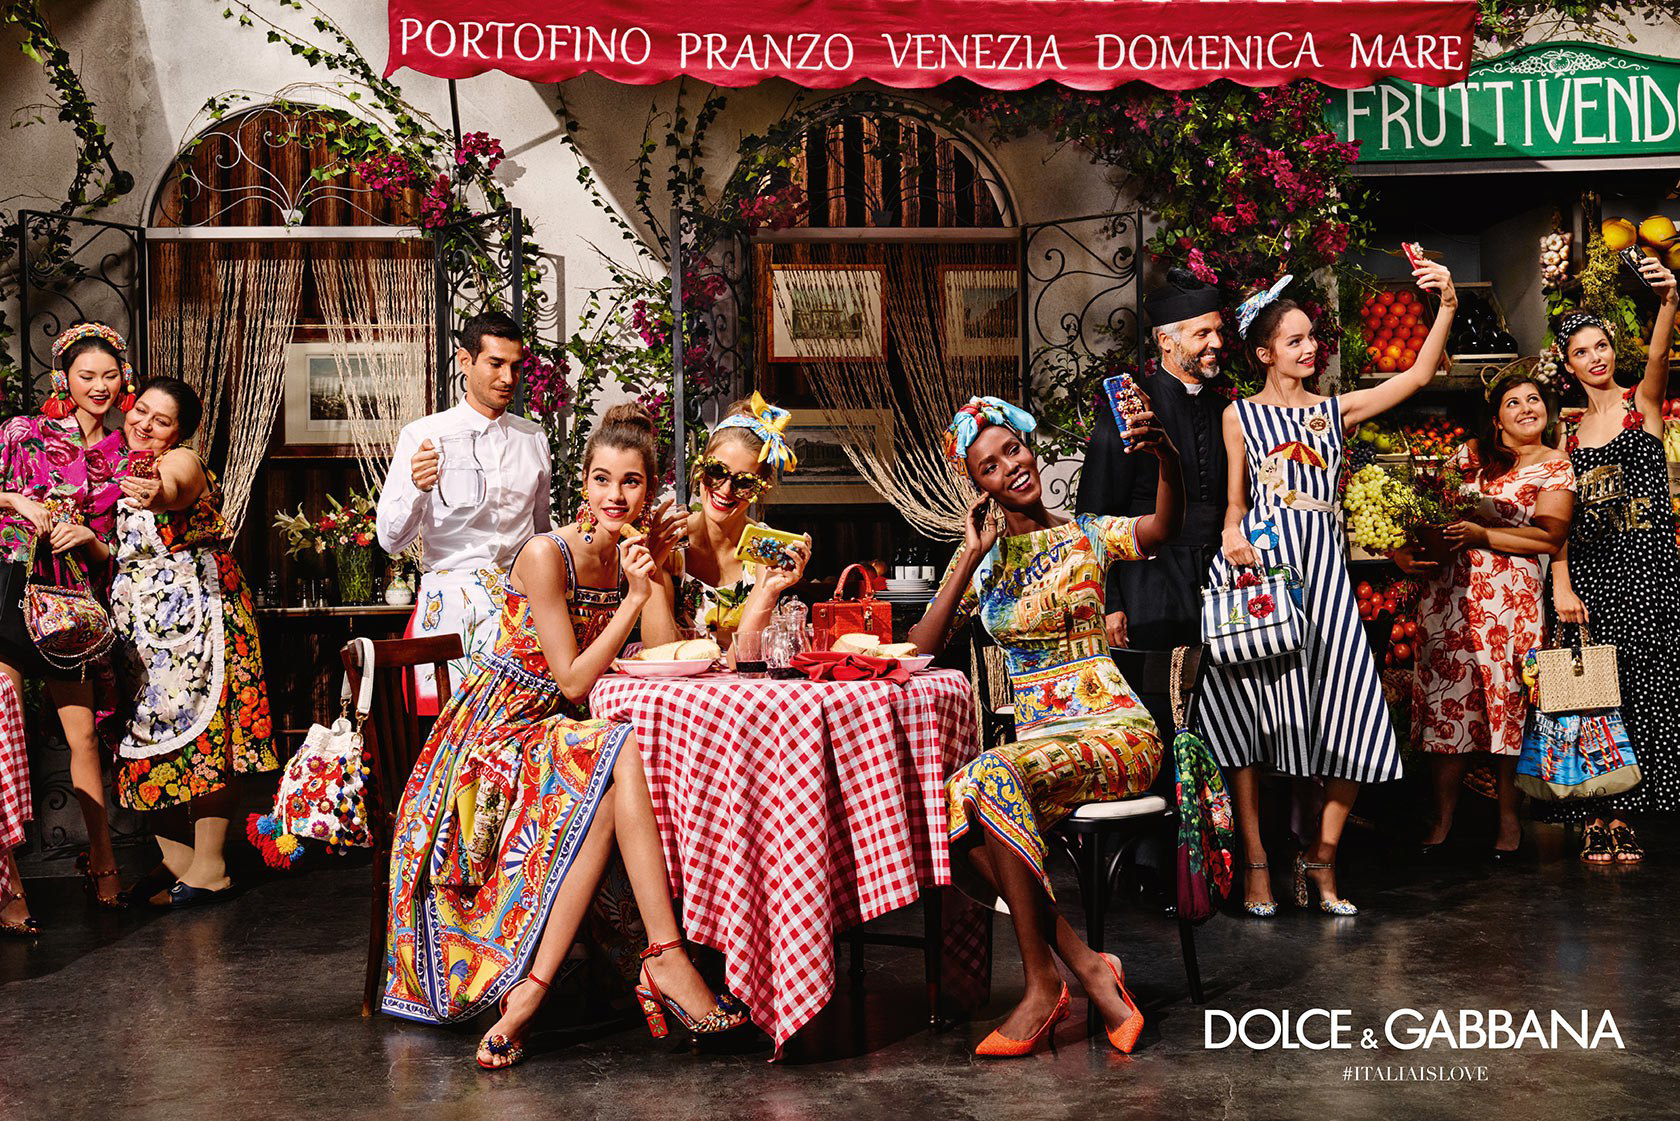 Arriba 64+ imagen dolce gabbana old collections